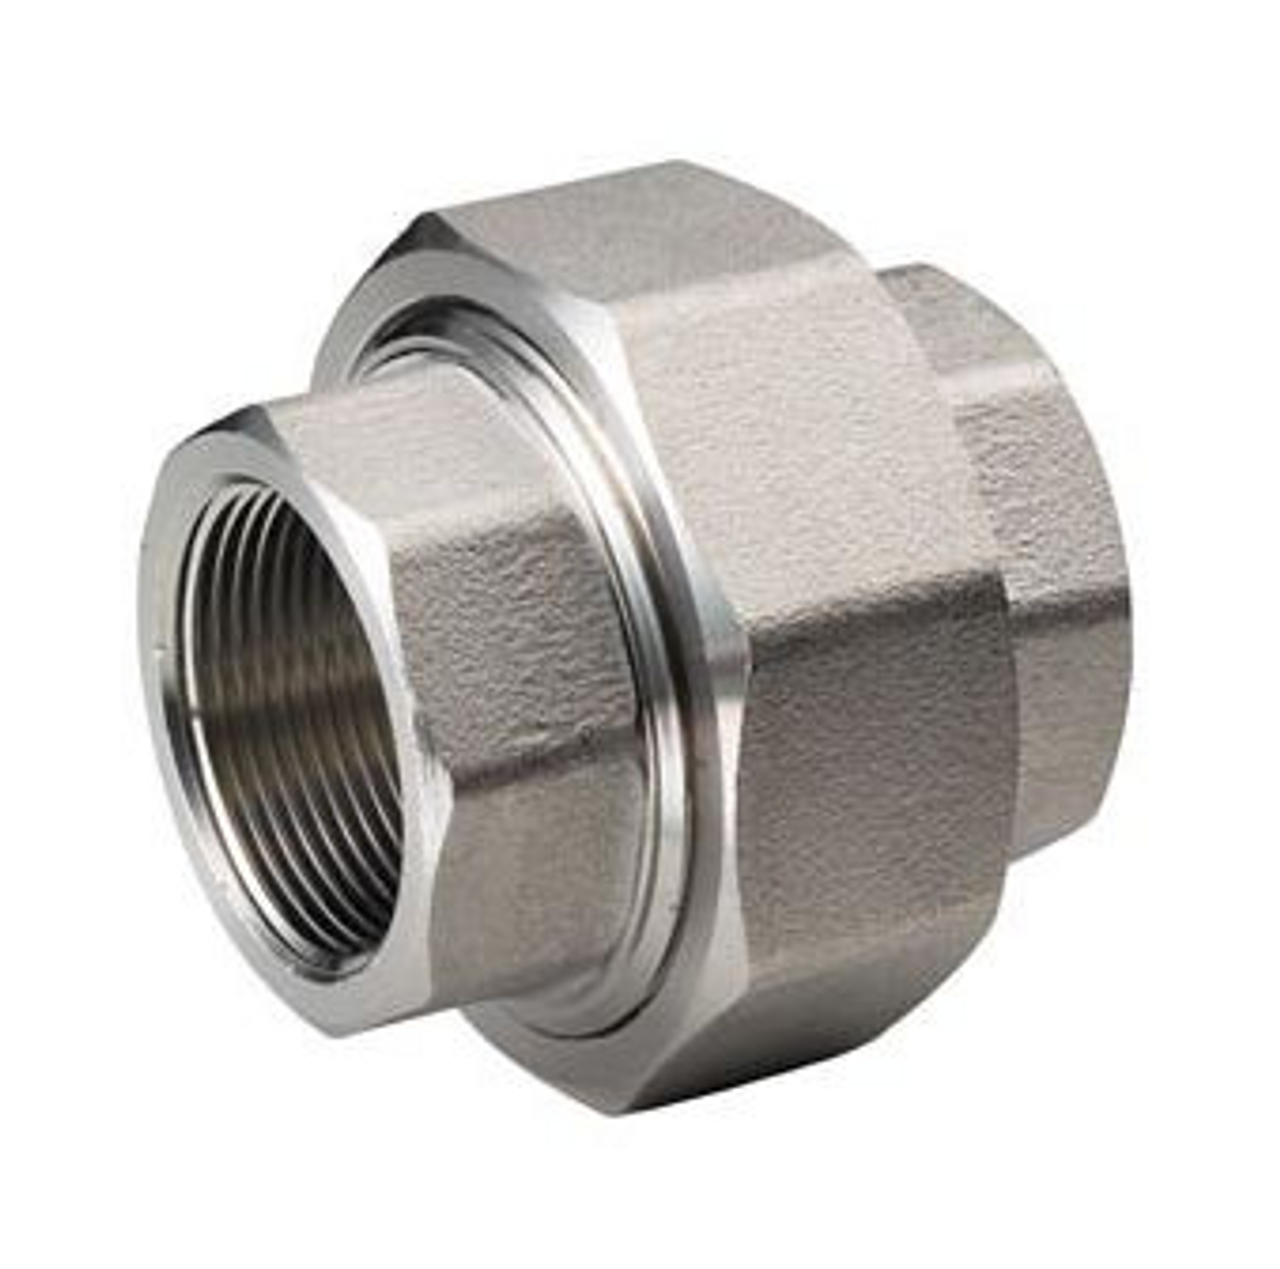 2" Stainless Steel 316 Female NPT Union  SS104-M